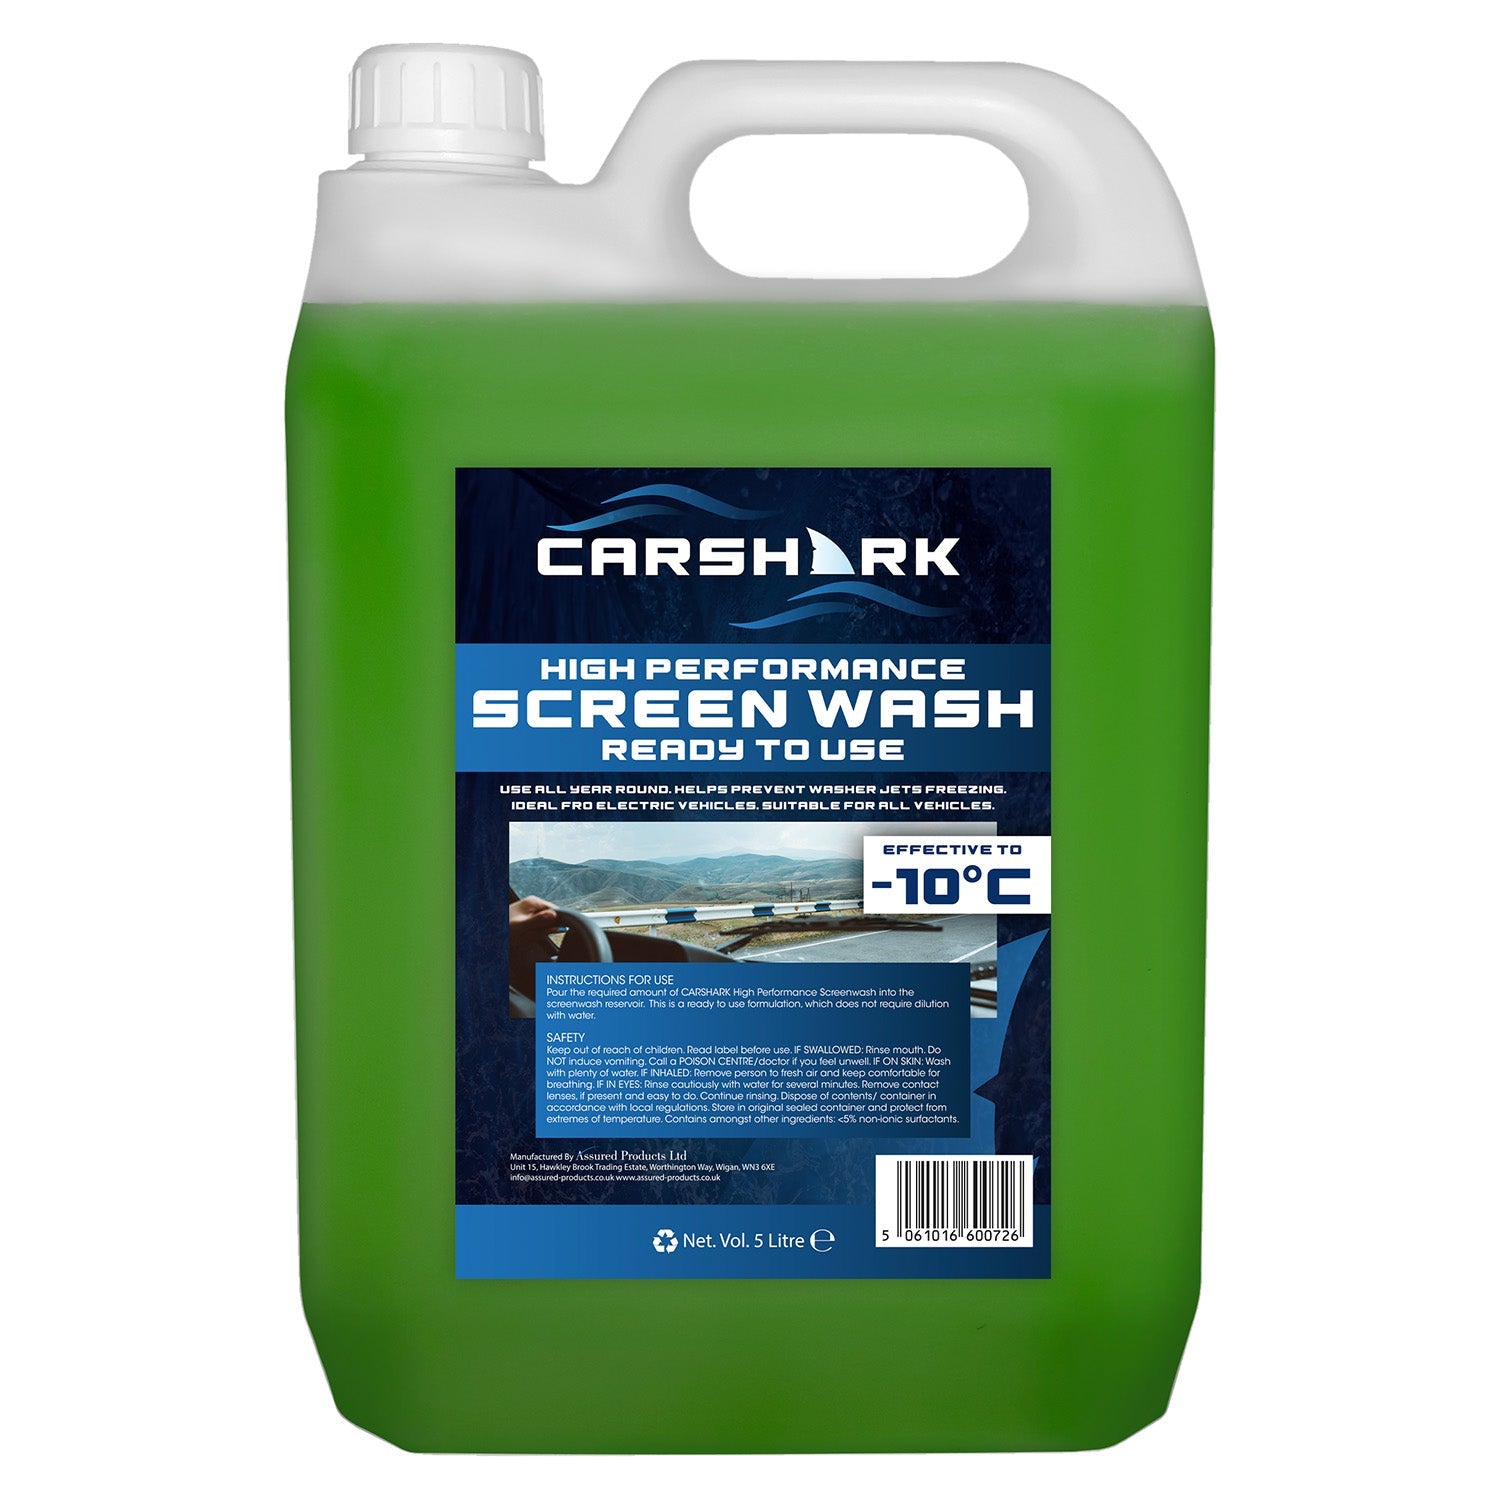 CARSHARK Winter High Performance Screenwash 2 x 5L Effective down to -10°C